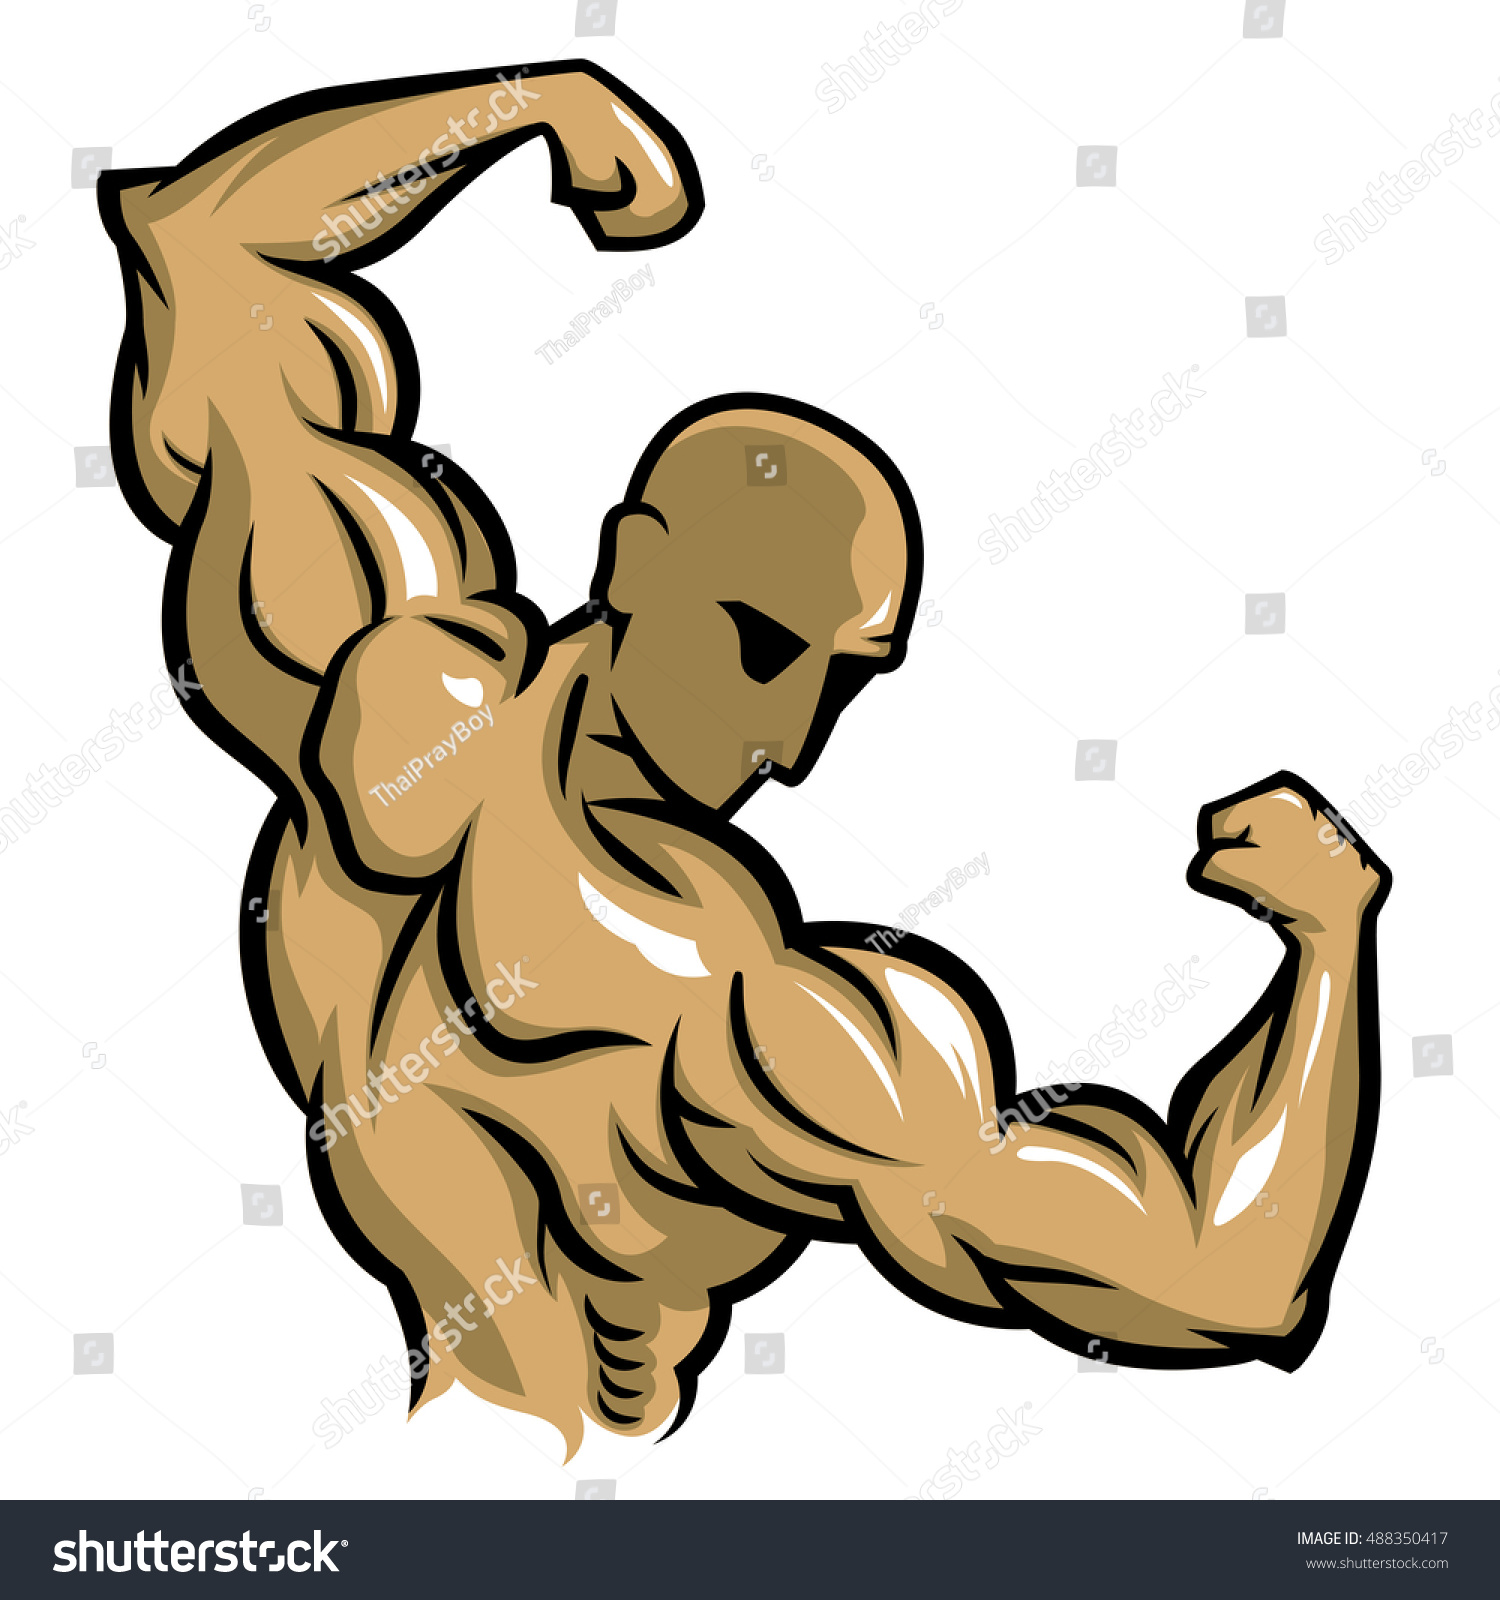 Bodybuilder Pose Back Double Biceps Simple Royalty Free Stock Vector 488350417 4674